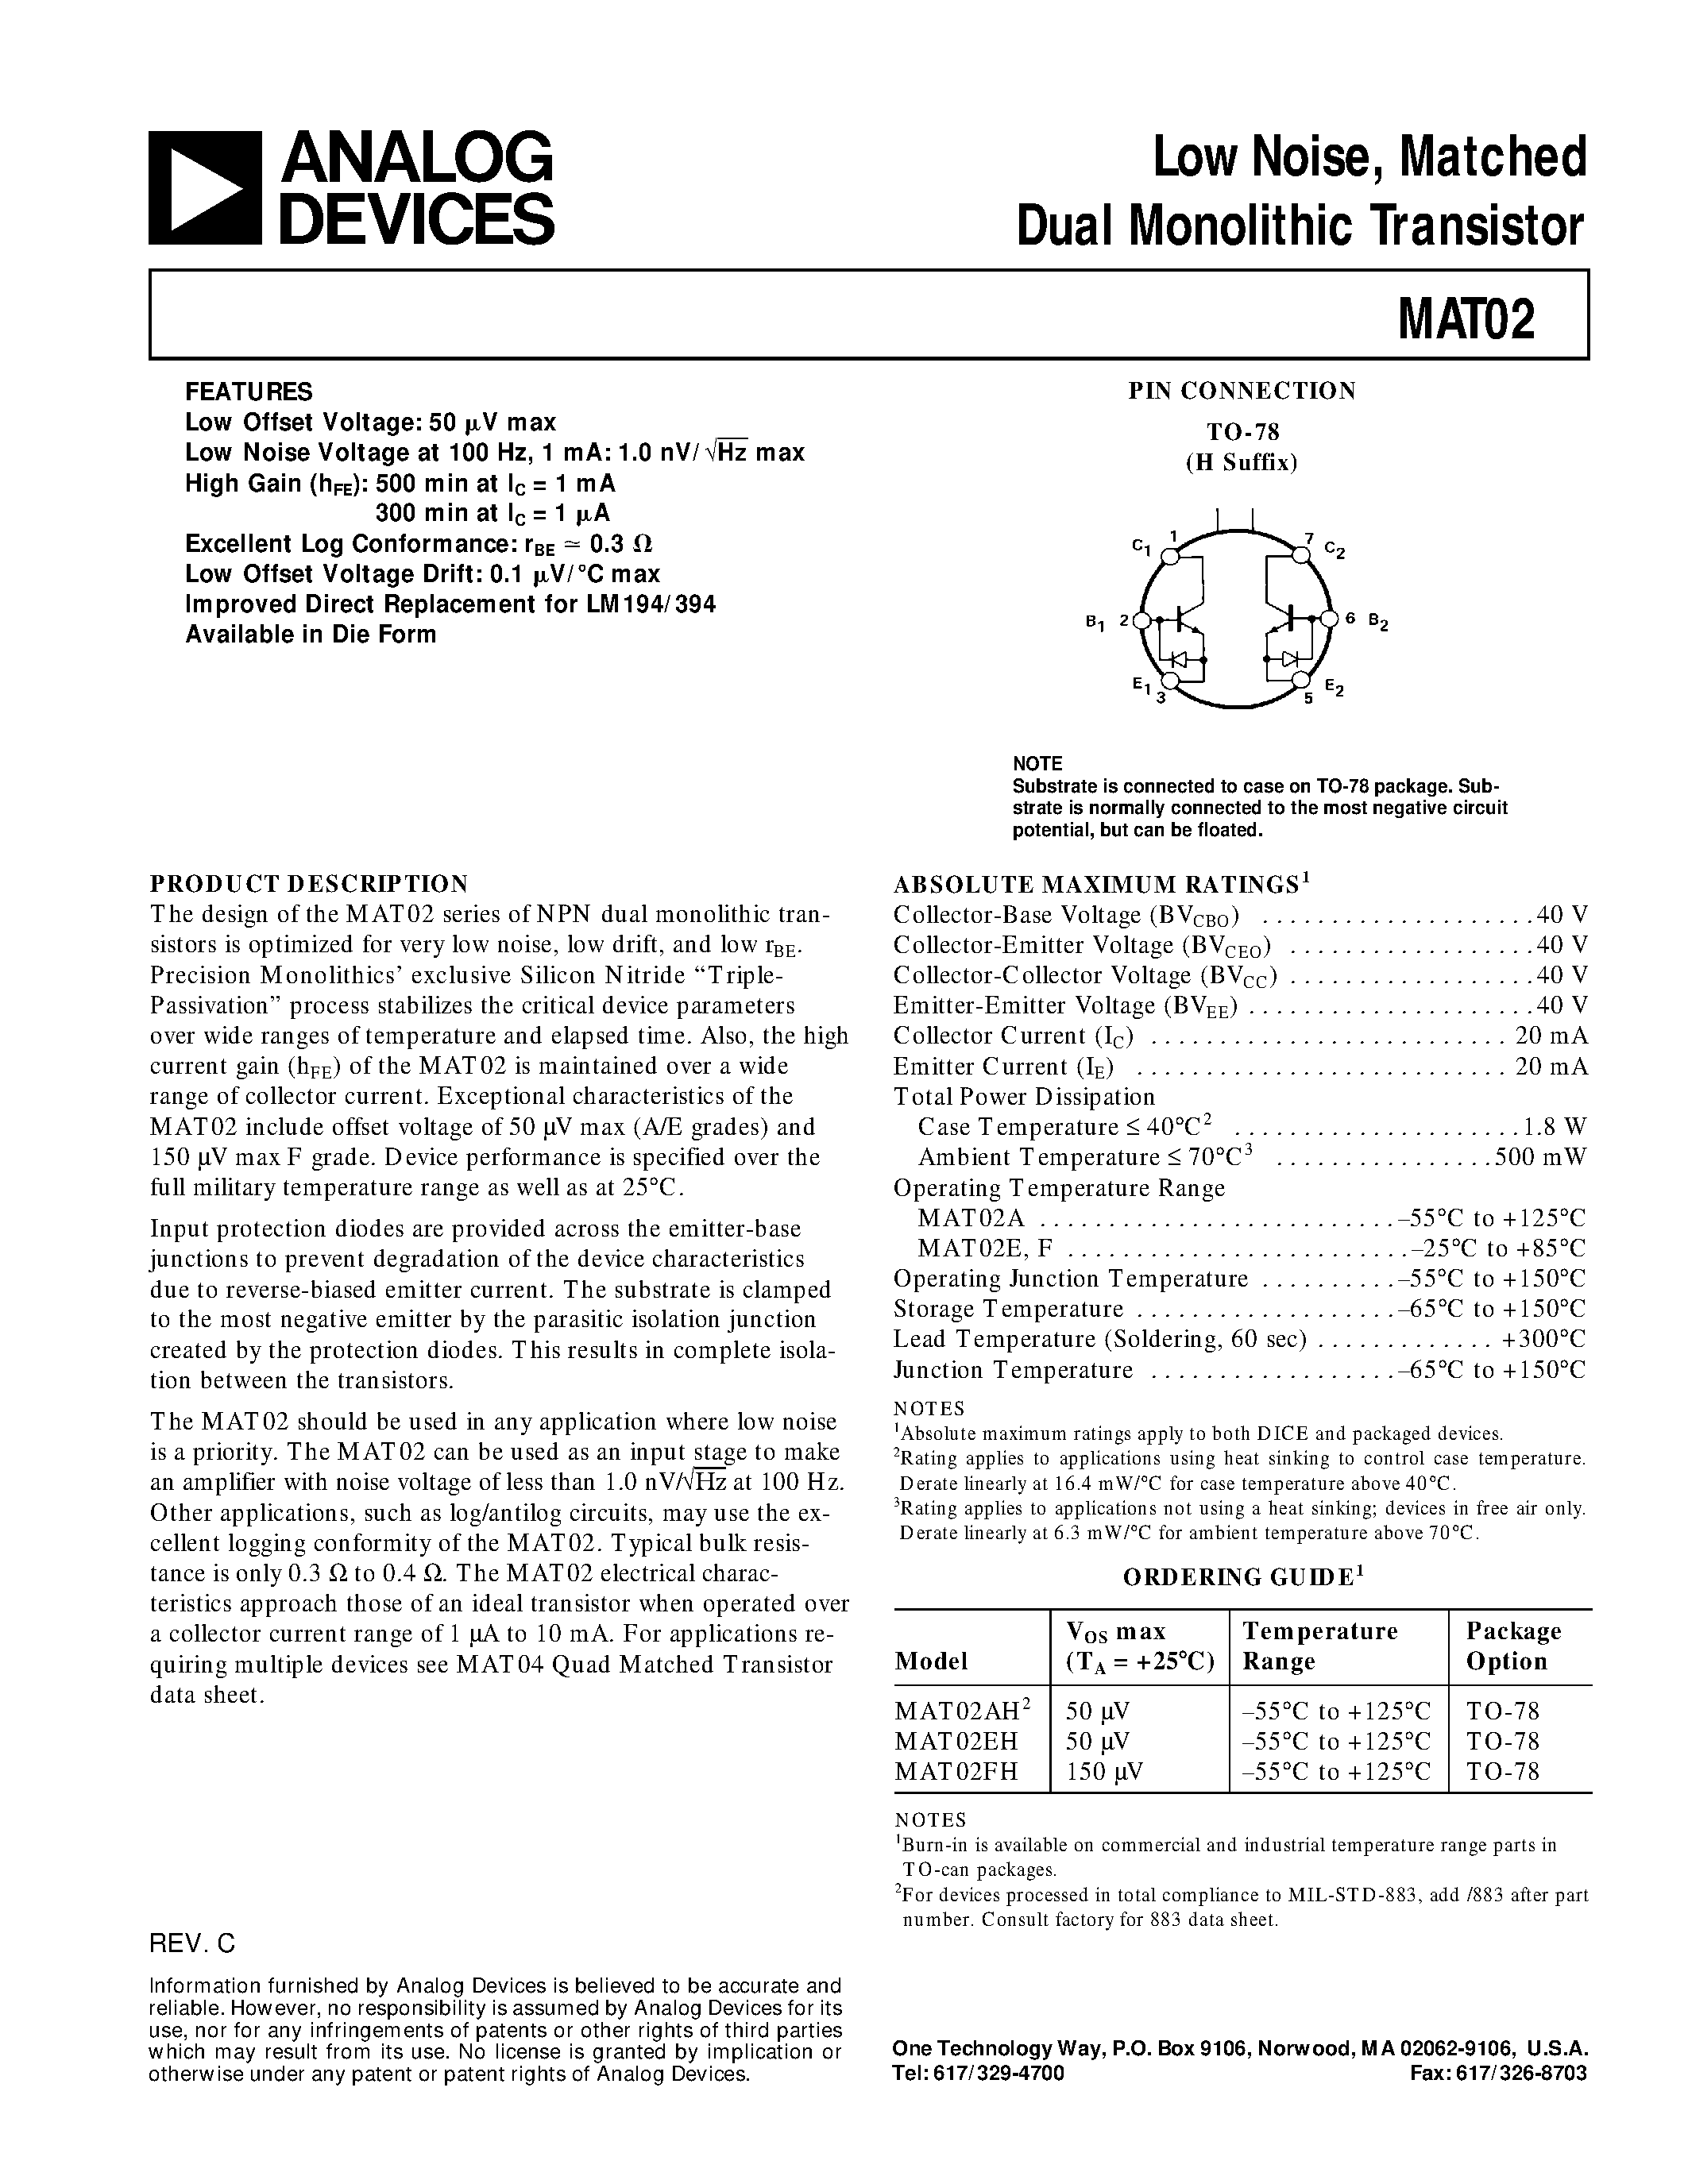 Datasheet MAT02 - Low Noise / Matched Dual Monolithic Transistor page 1